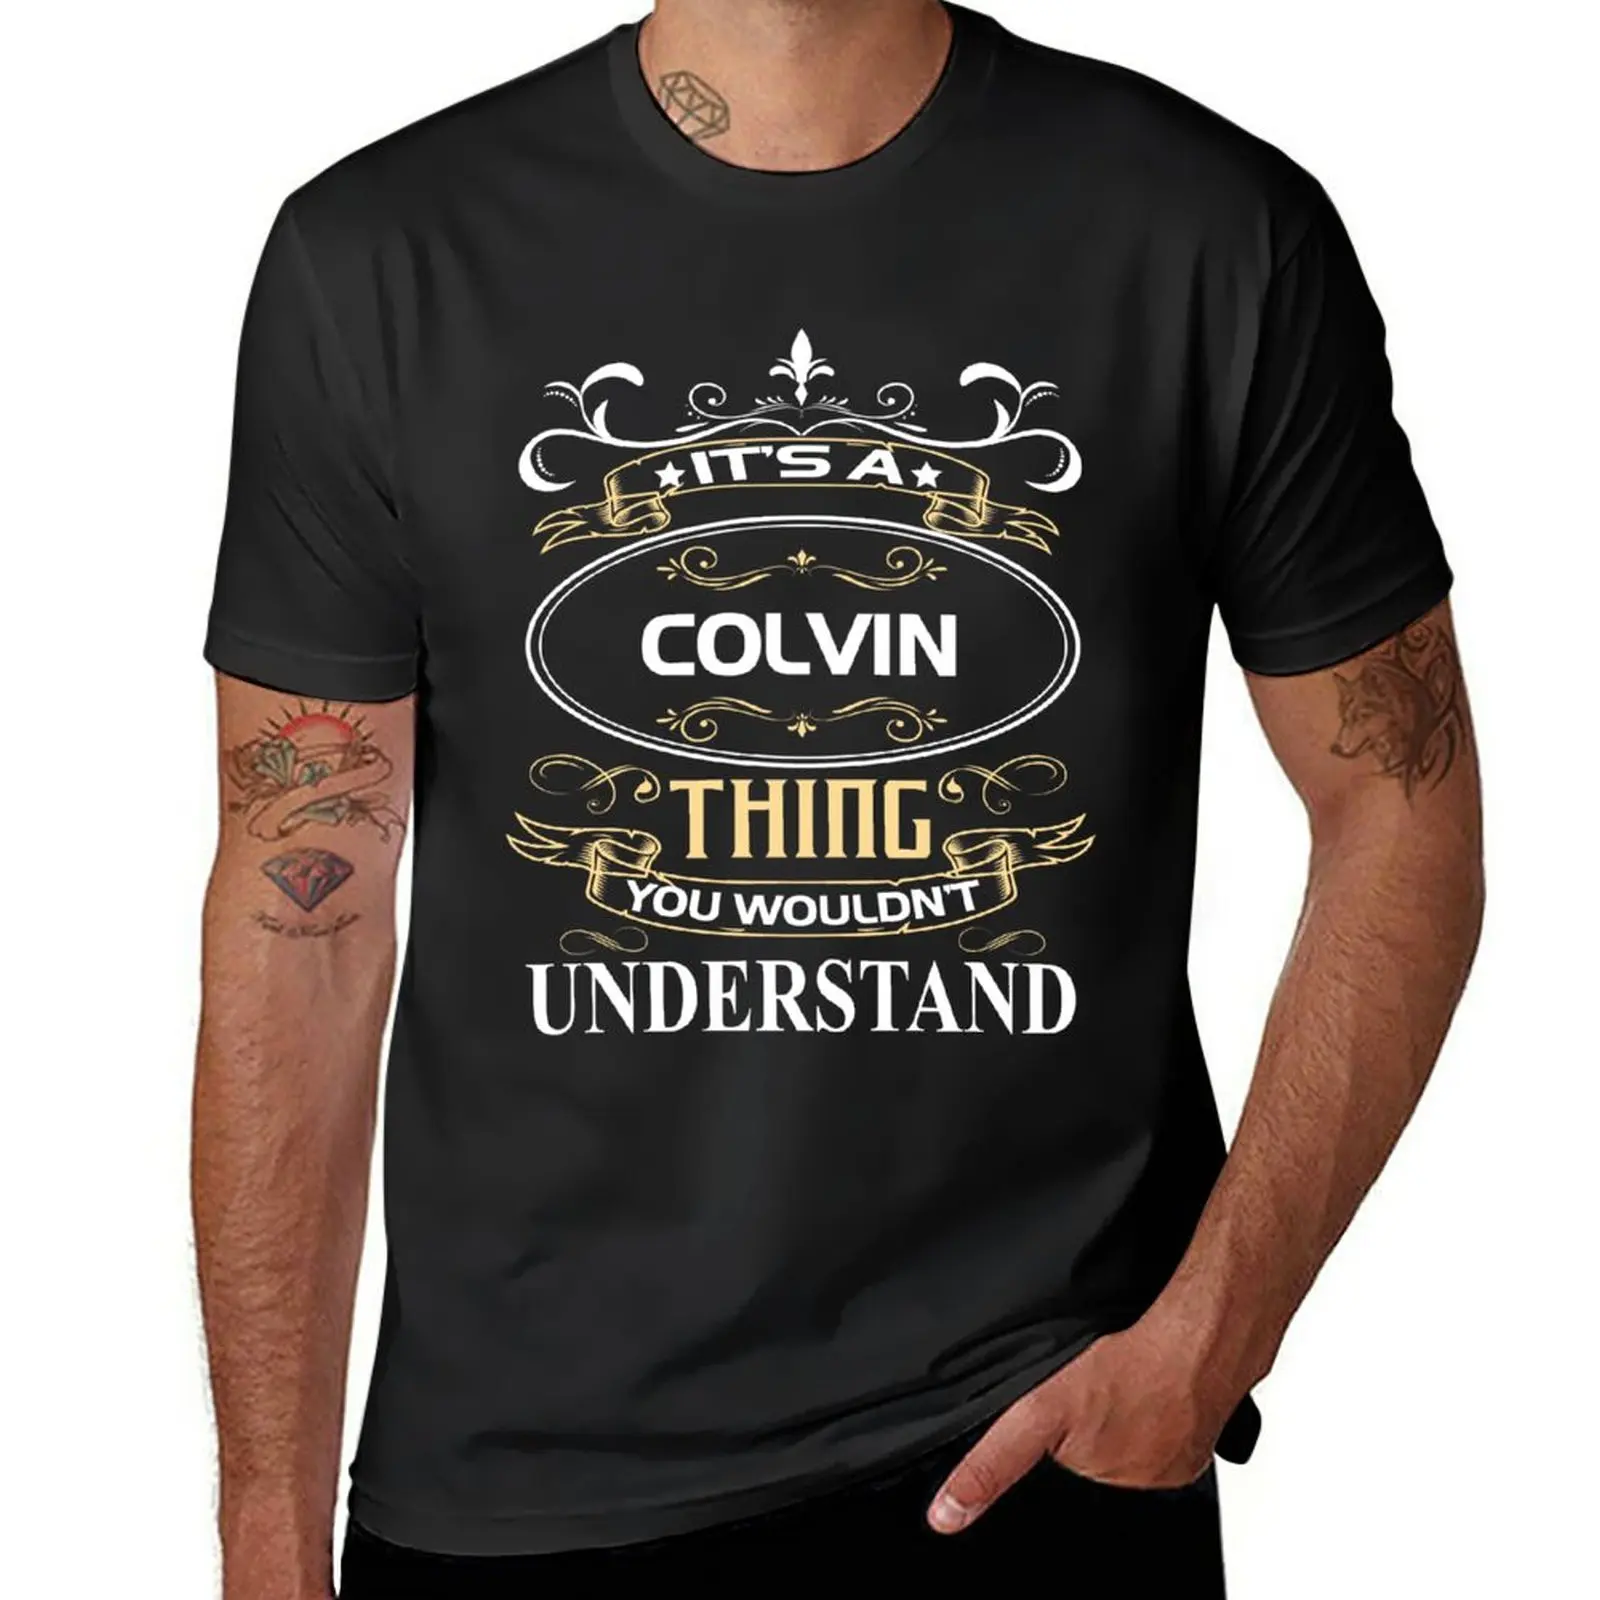 

New Colvin Name Shirt It's A Colvin Thing You Wouldn't Understand T-Shirt aesthetic clothes man clothes Men's t shirts